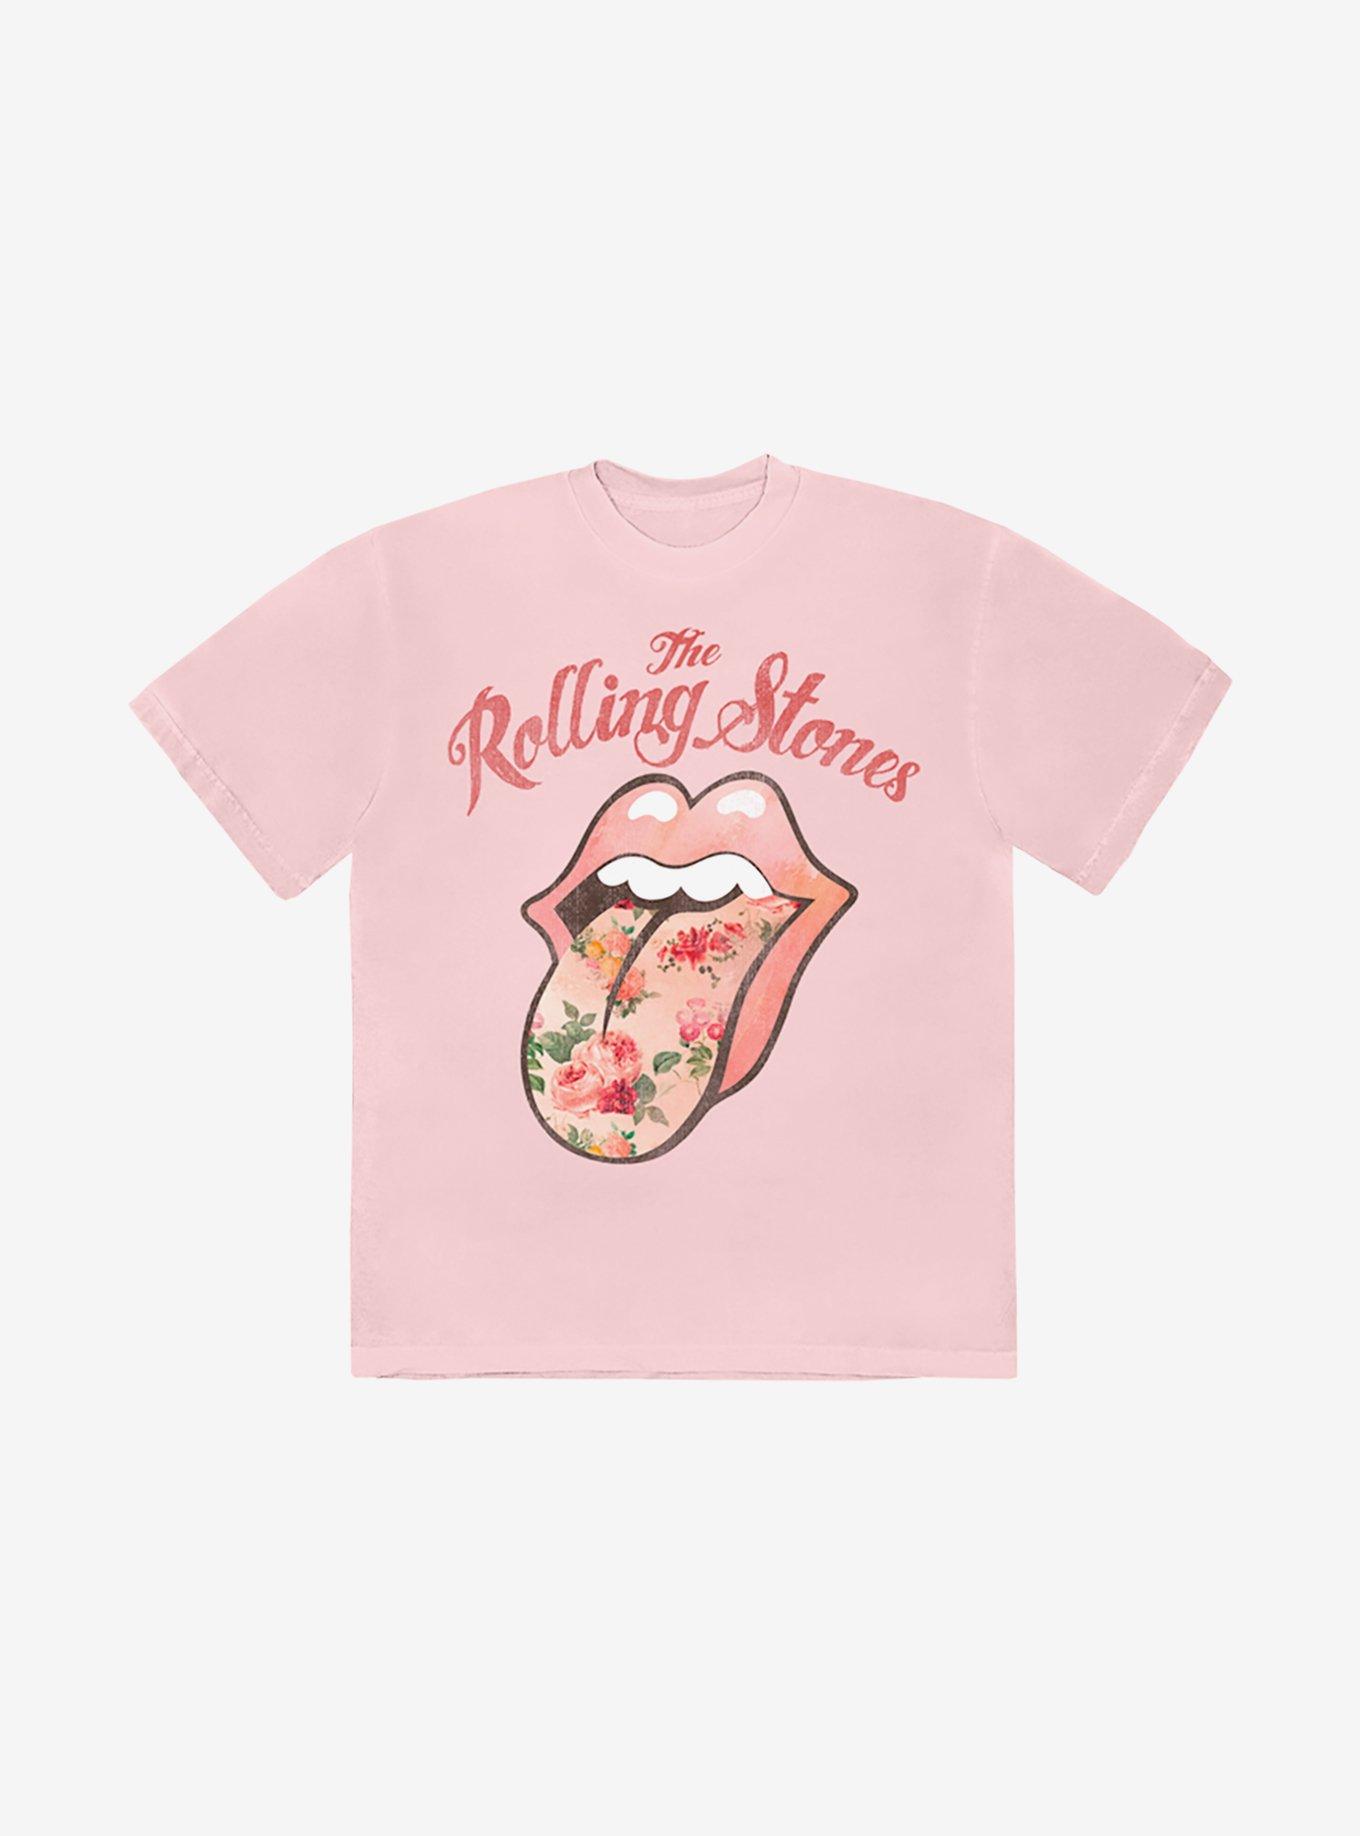 The Rolling Stones Floral Logo Boyfriend Fit Girls T-Shirt | Hot Topic